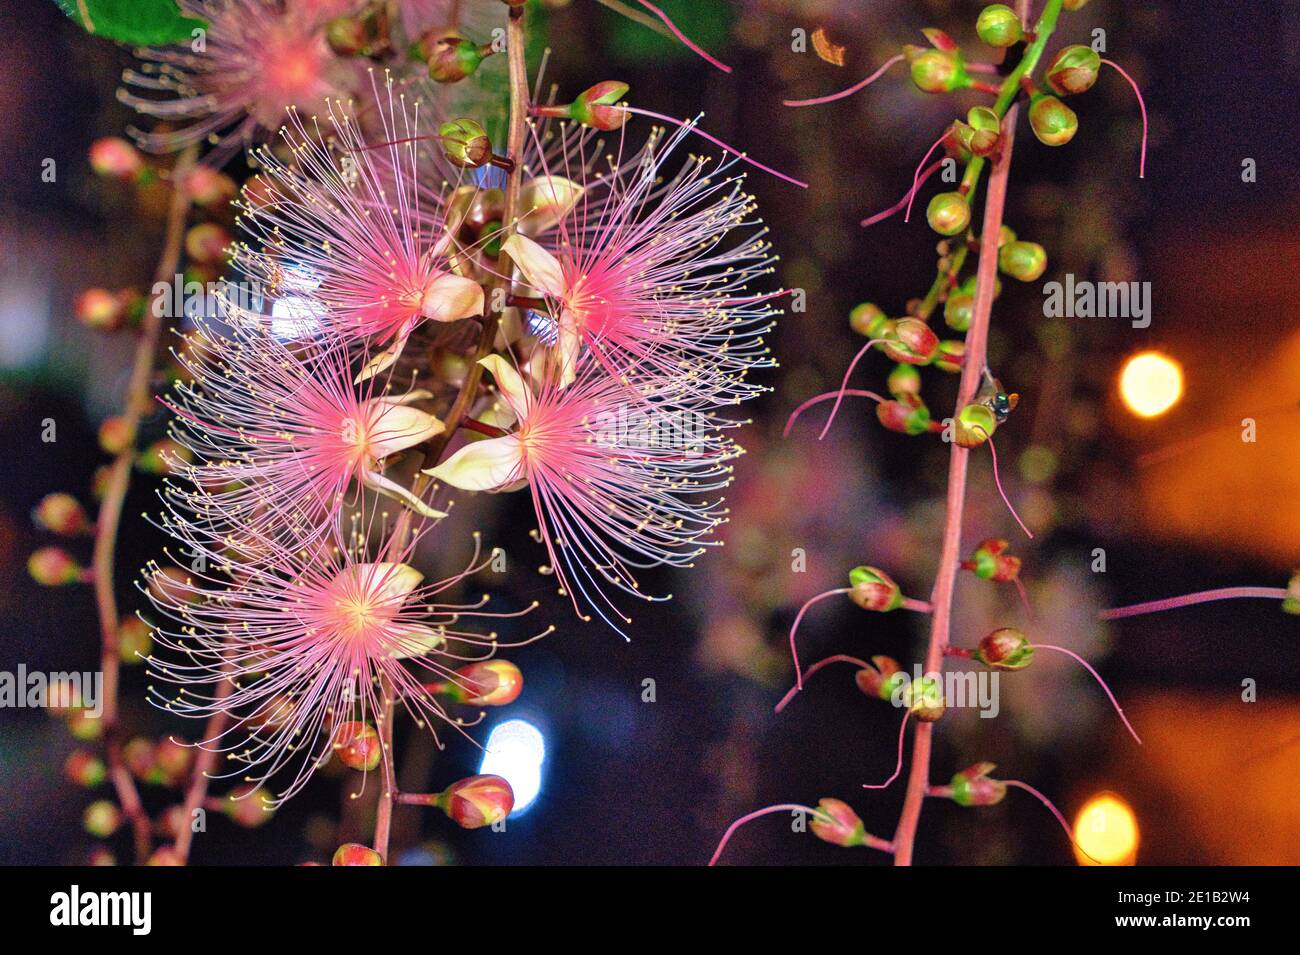 Barringtonia racemosa or powder puff tree flower at night in Yilan, Taiwan. Strings of flowers hang from the trees like fireworks. Taken in the summer Stock Photo